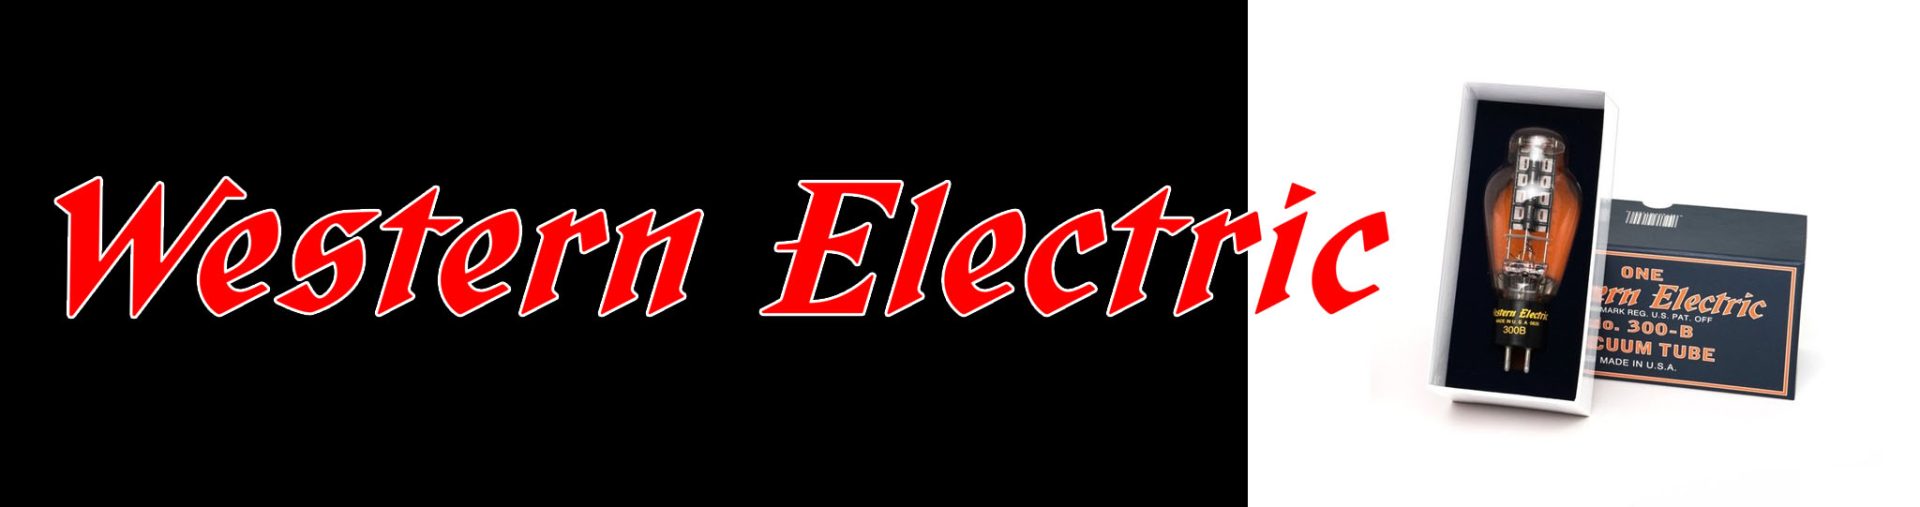 Visit  Western Electric page for full product details